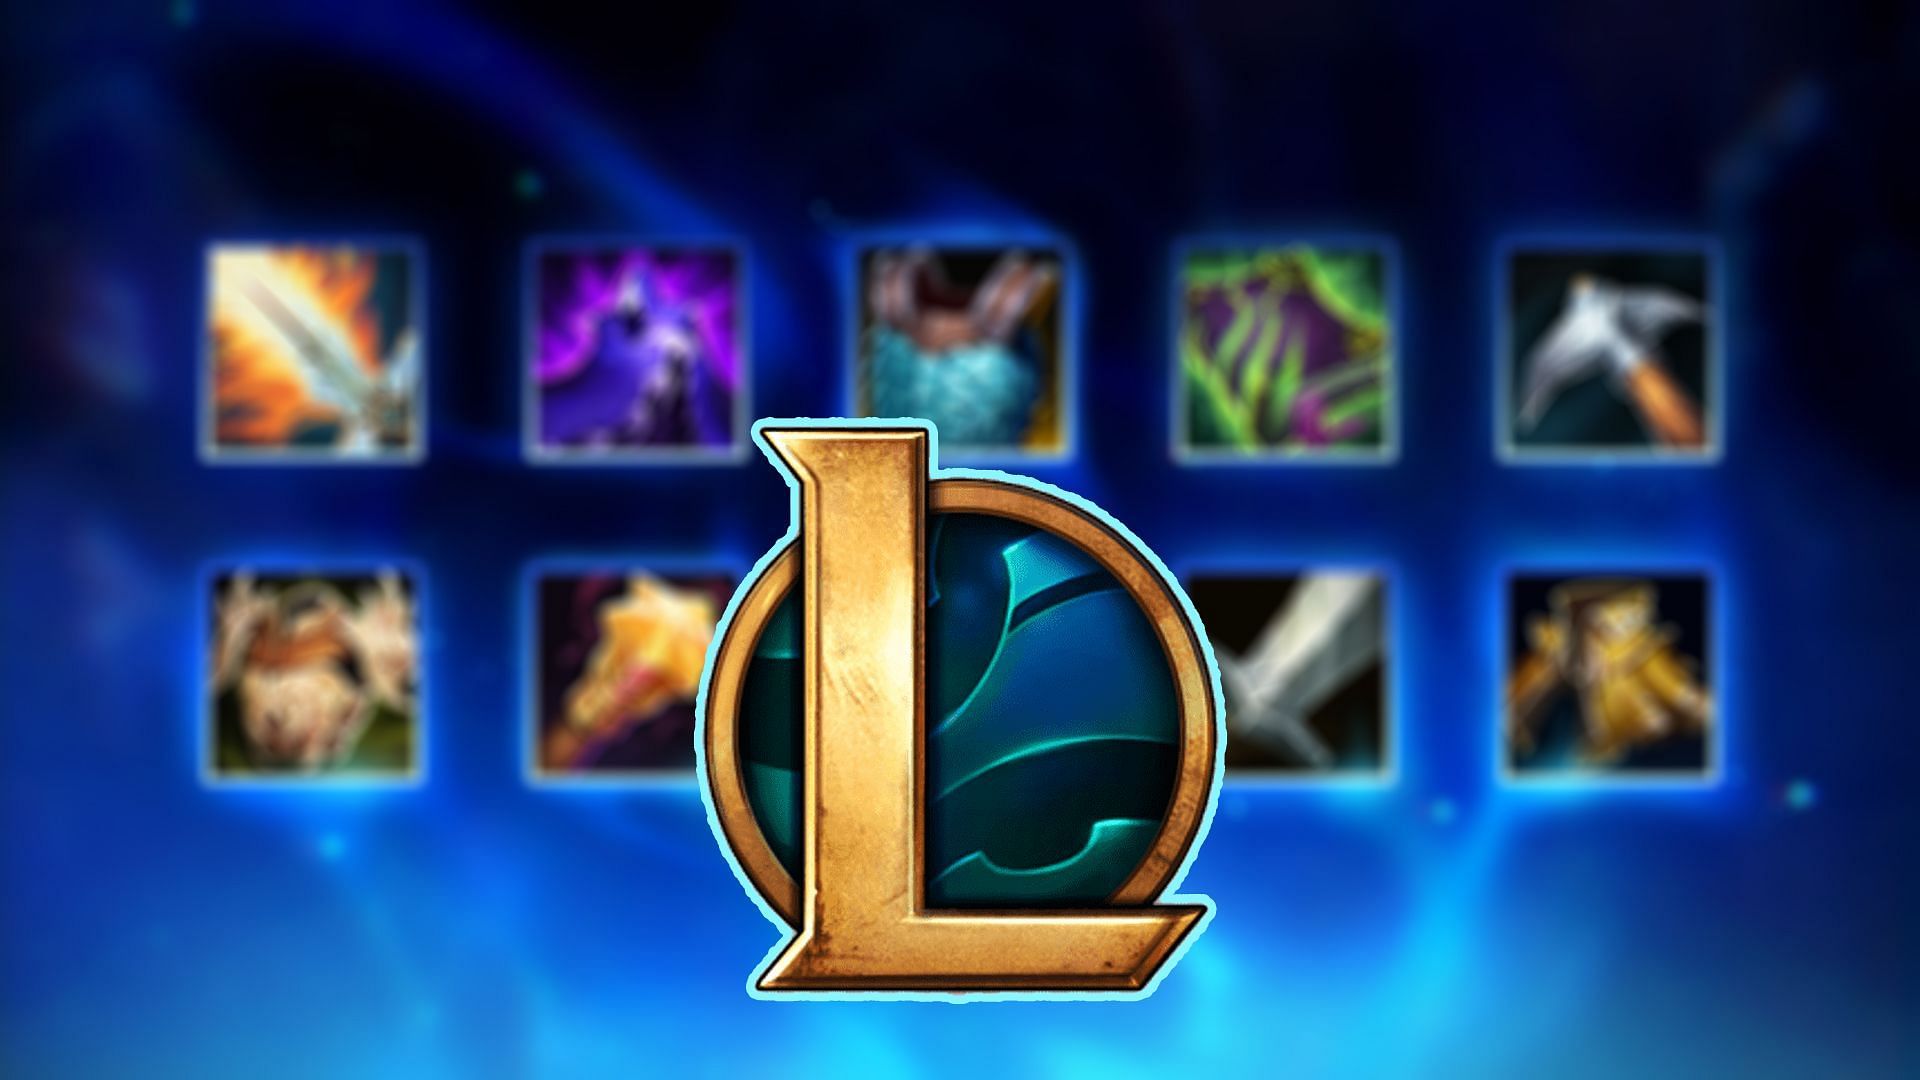 Mythic items are set to be removed from League of Legends Season 14 (Image via Riot Games)